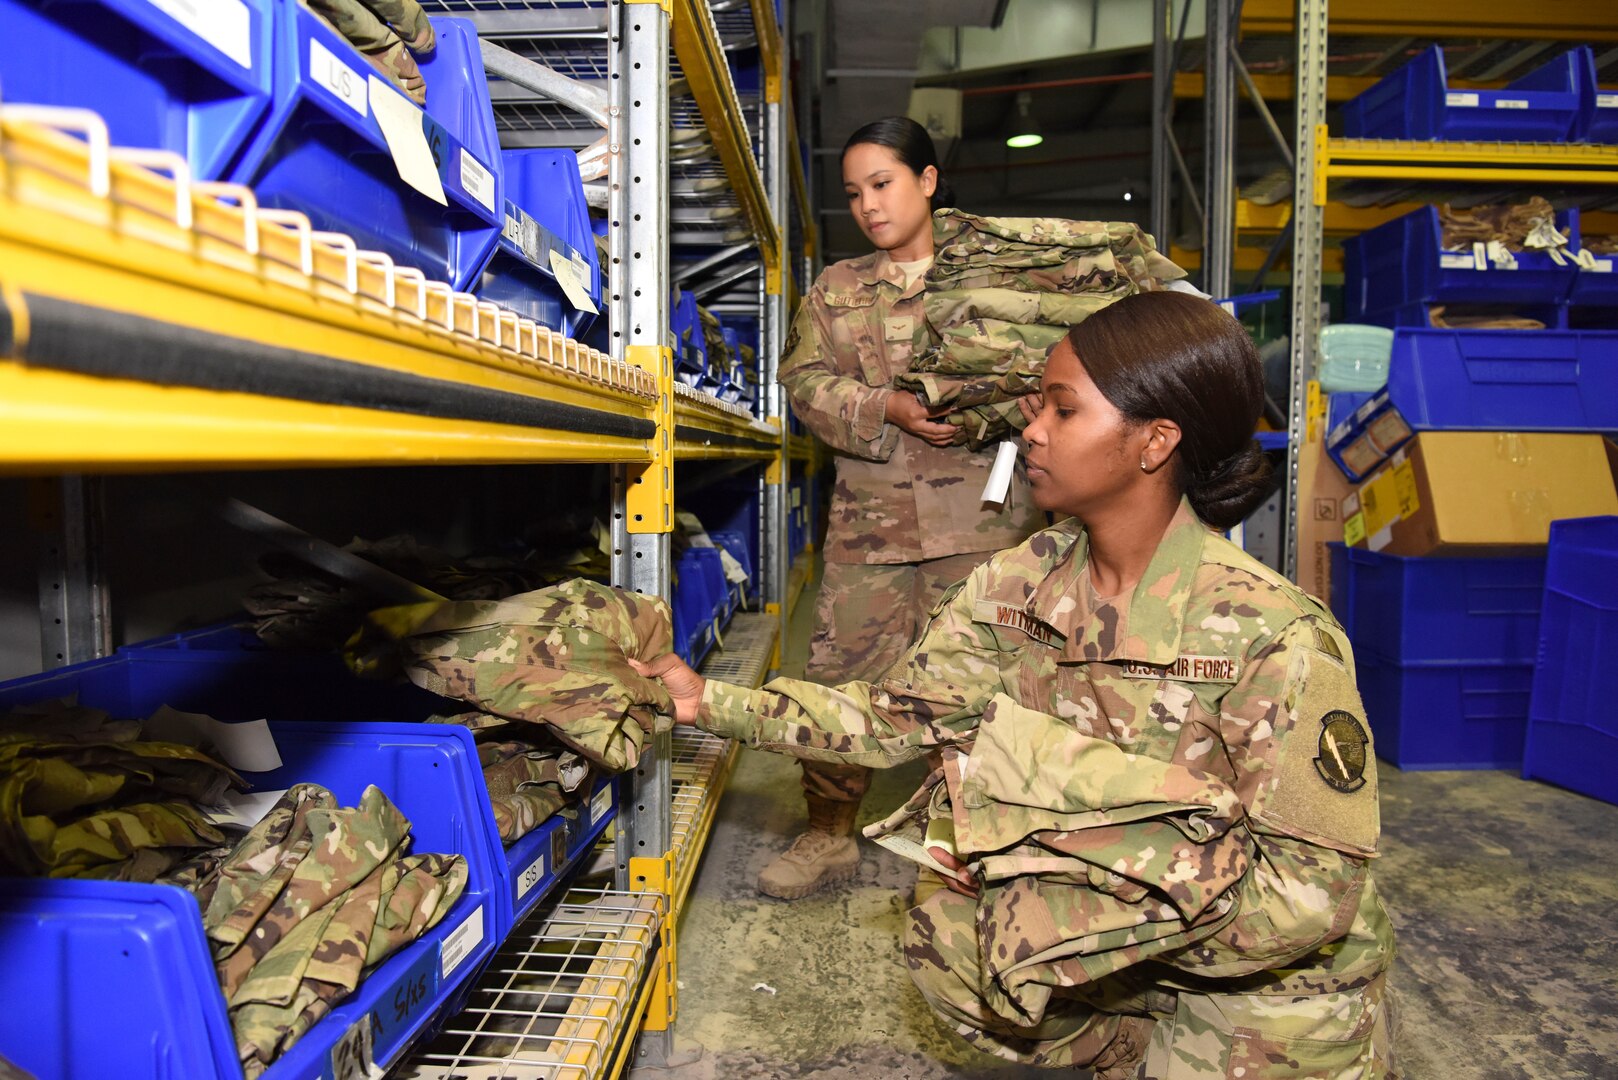 Senior Airman Kerby Witman, 380th ELRS customer service technician (front), and Airman 1st Class Michelle Gutierrez, 380th ELRS customer service technician, perform a uniform inspection inside of Desert Depot at Al Dhafra Air Base, United Arab Emirates, Feb. 11, 2019.